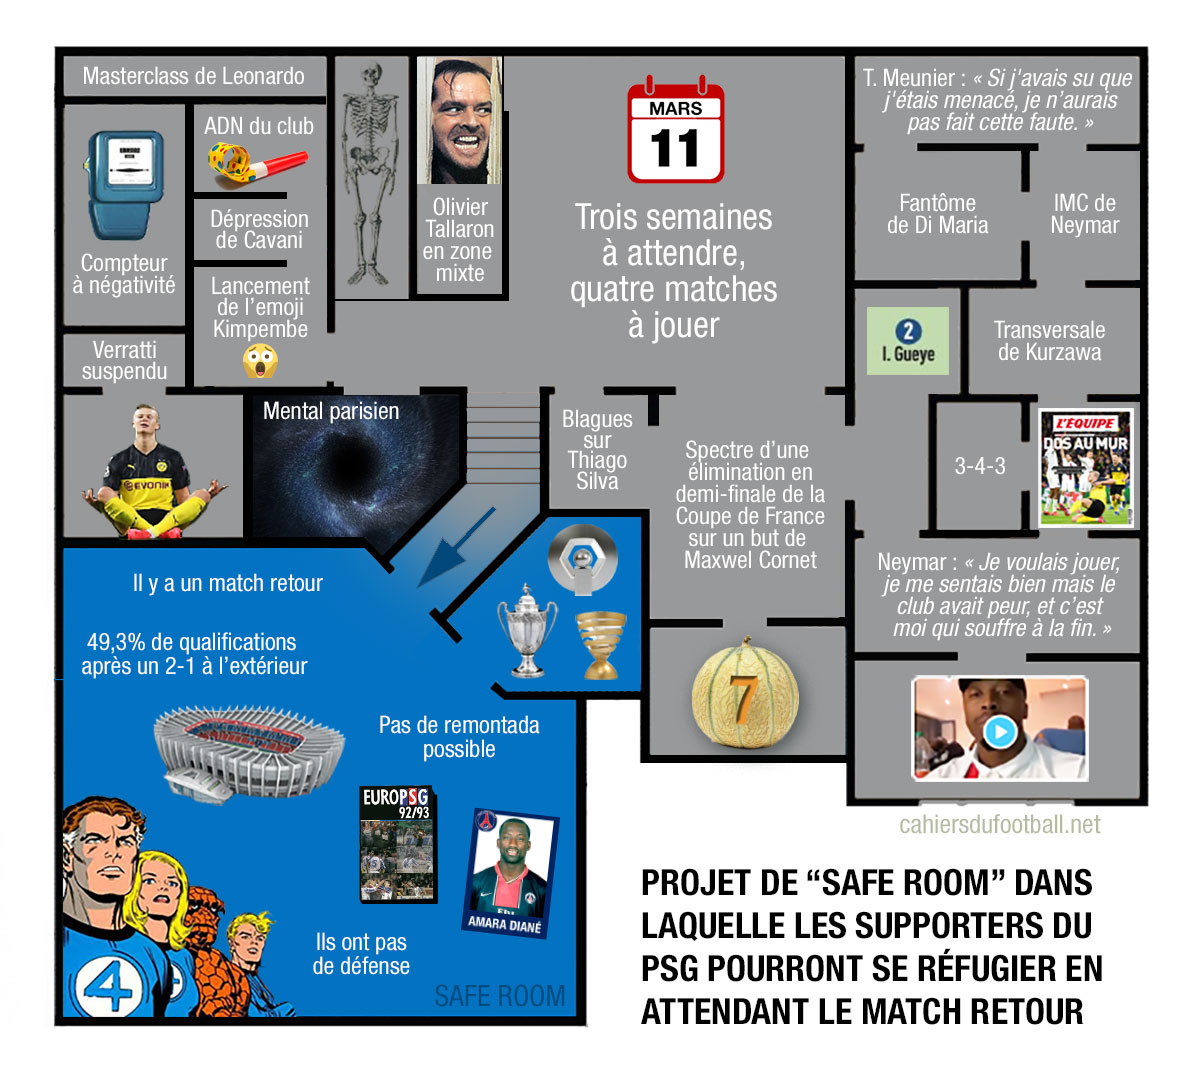 http://www.cahiersdufootball.net/images-article/images2/2020_02/safe-room-psg.jpg